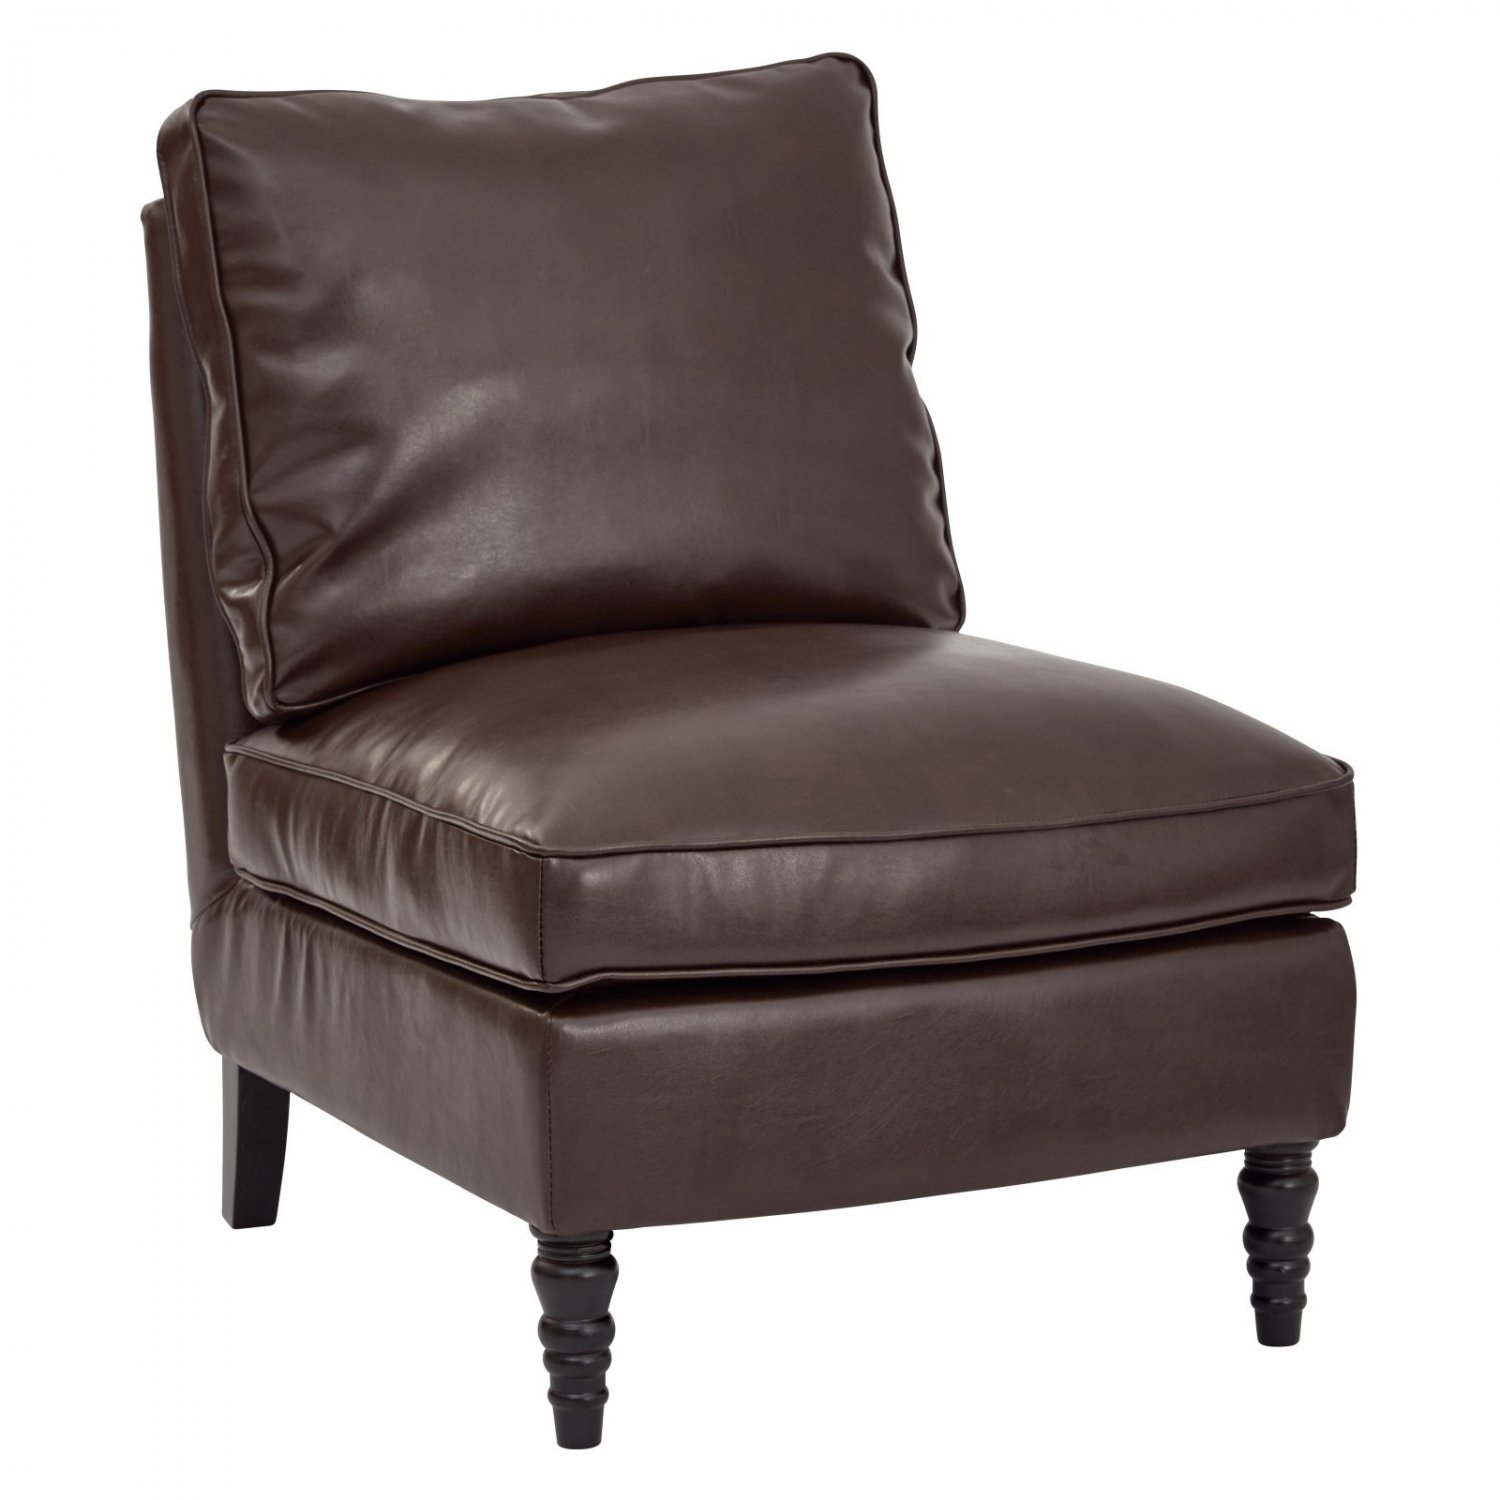 Martin Accent Chair In Cocoa Bonded Leather With Solid Wood Legs